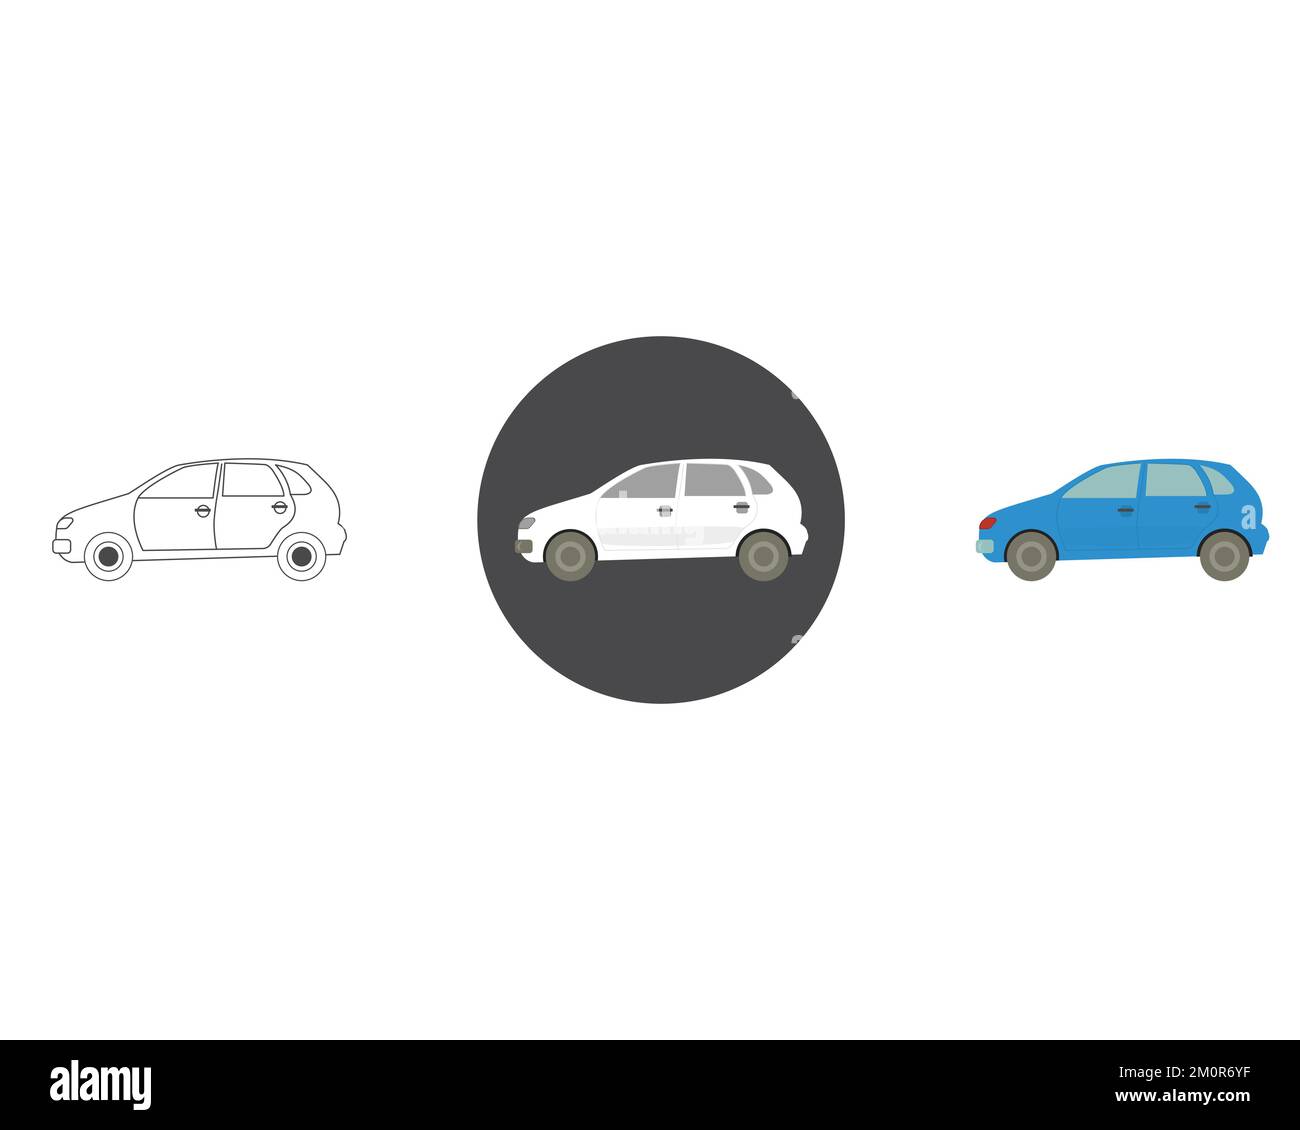 Family car vector icon based illustration with contrast colors, fully vector monogram Stock Vector